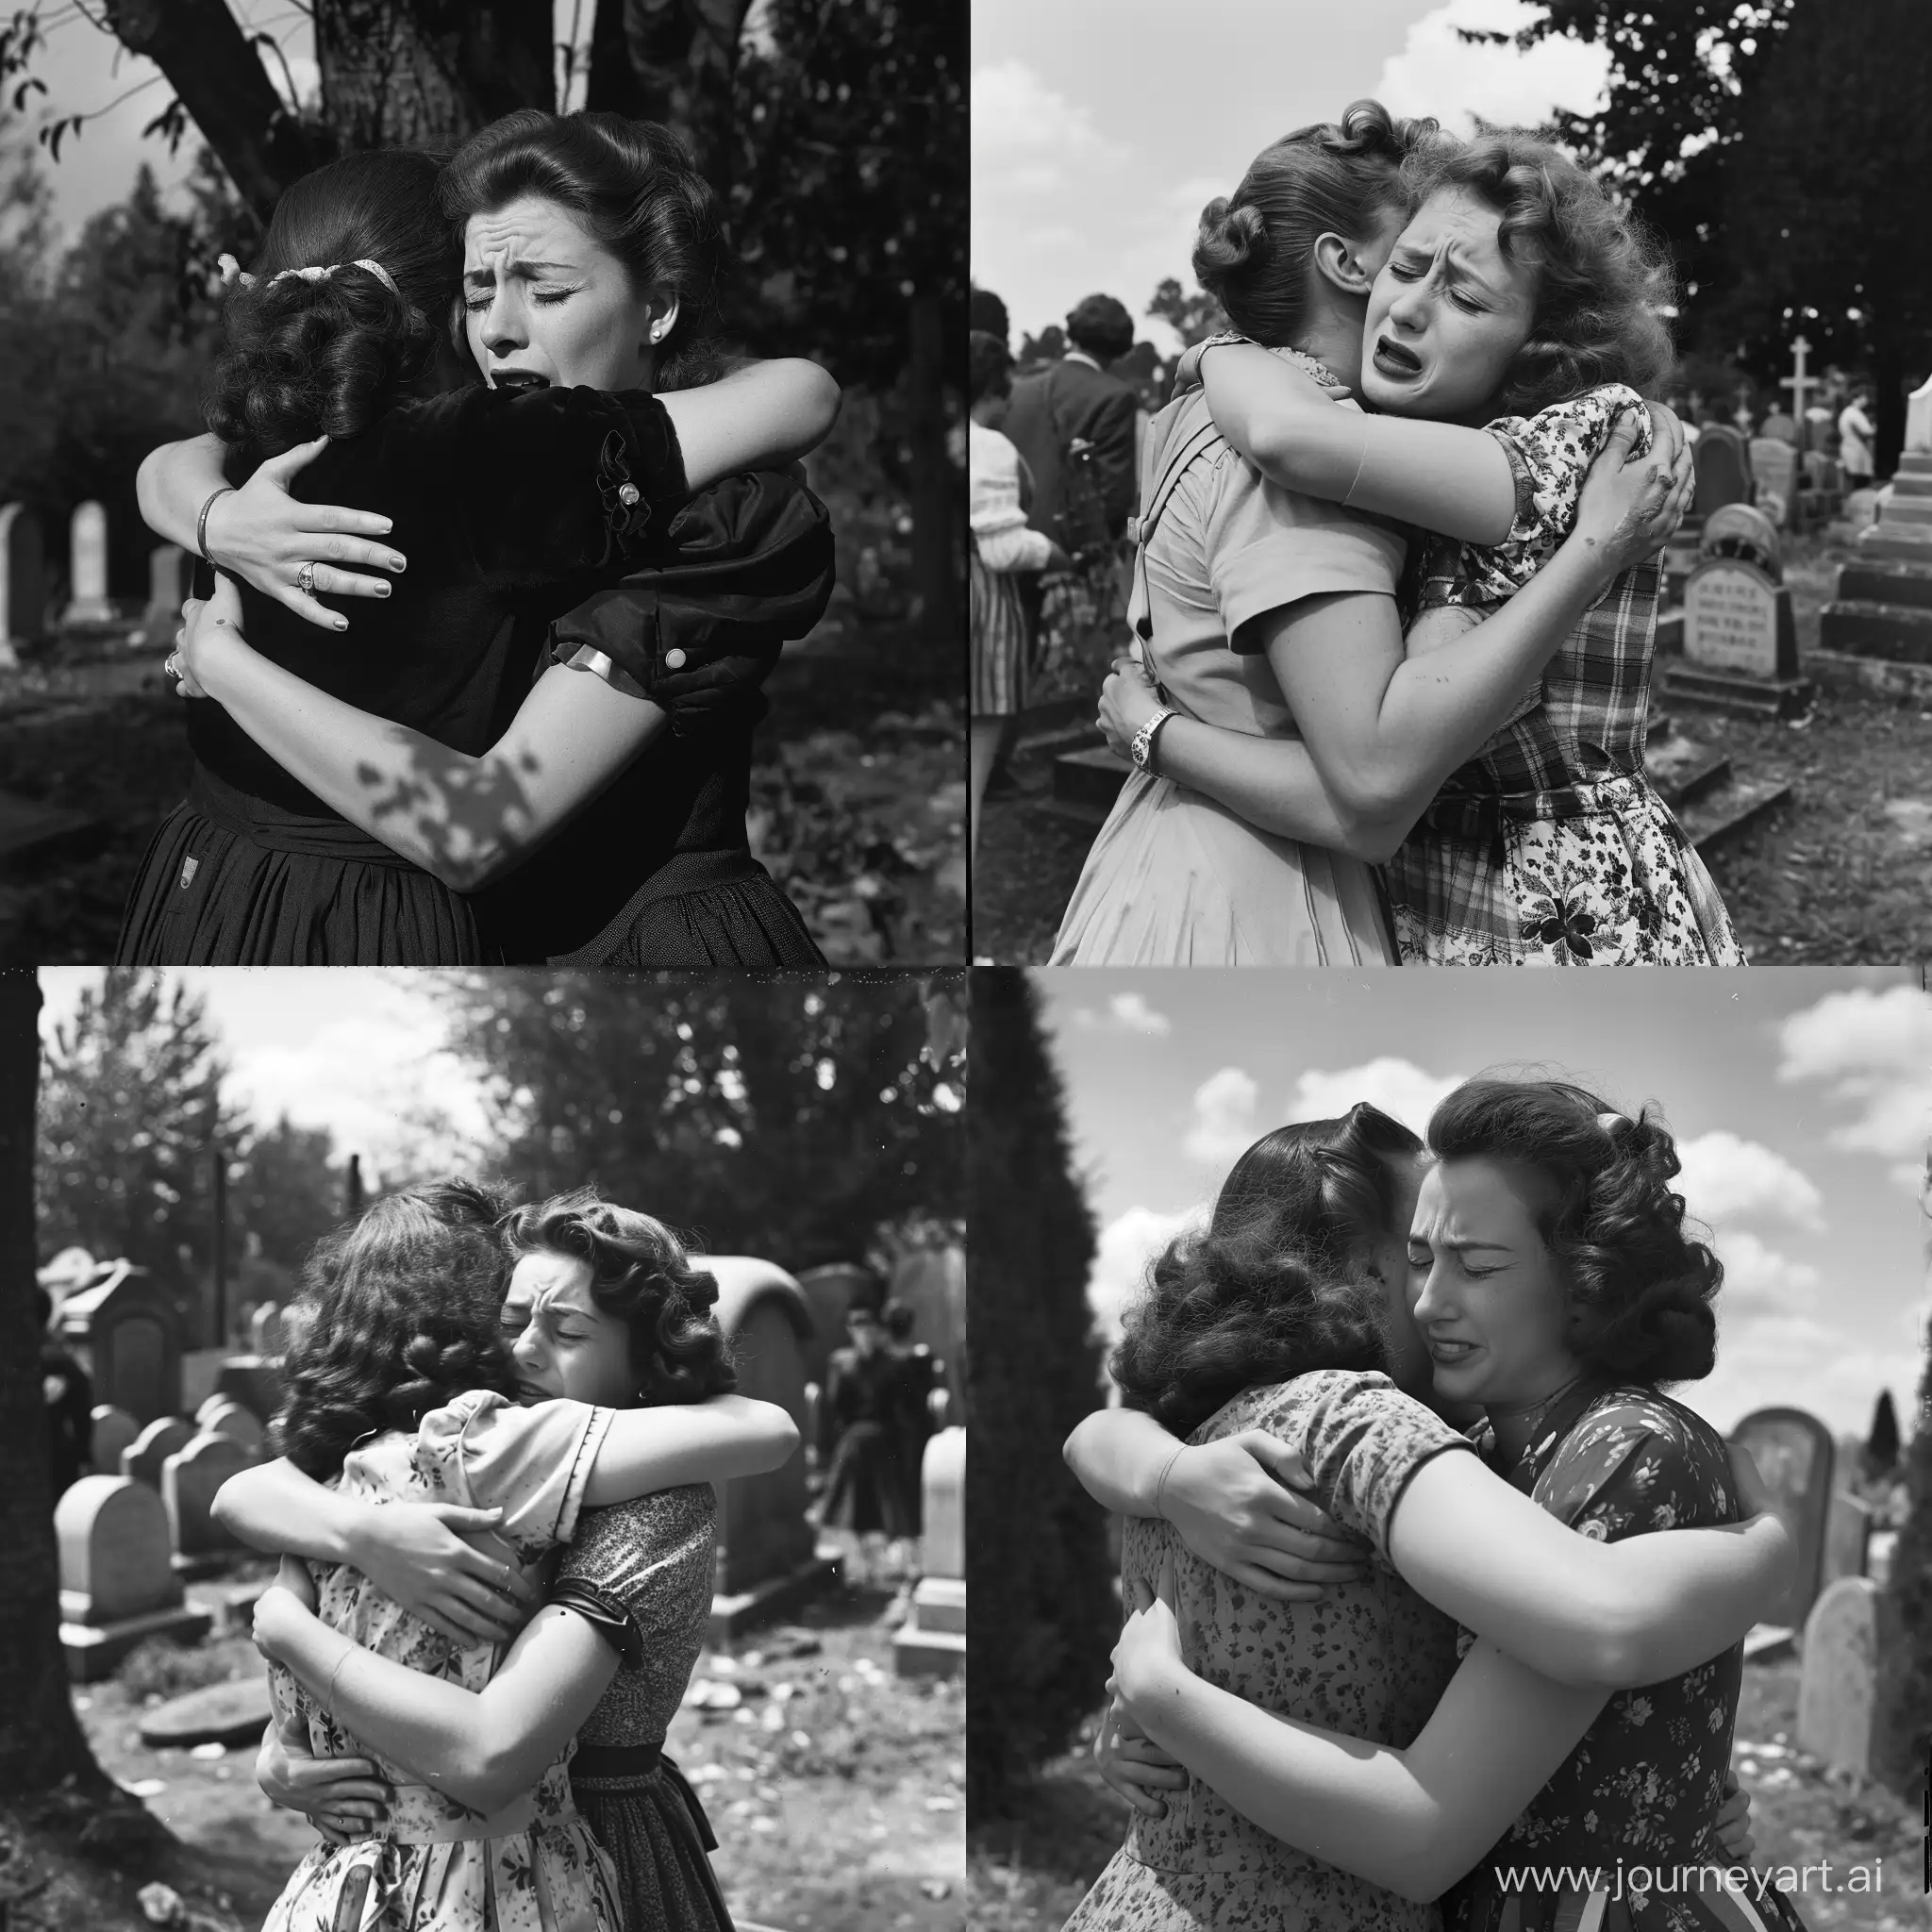 Lesbian european french short sleeves puffy compression 1950s Photo  hug crying wail cemetery